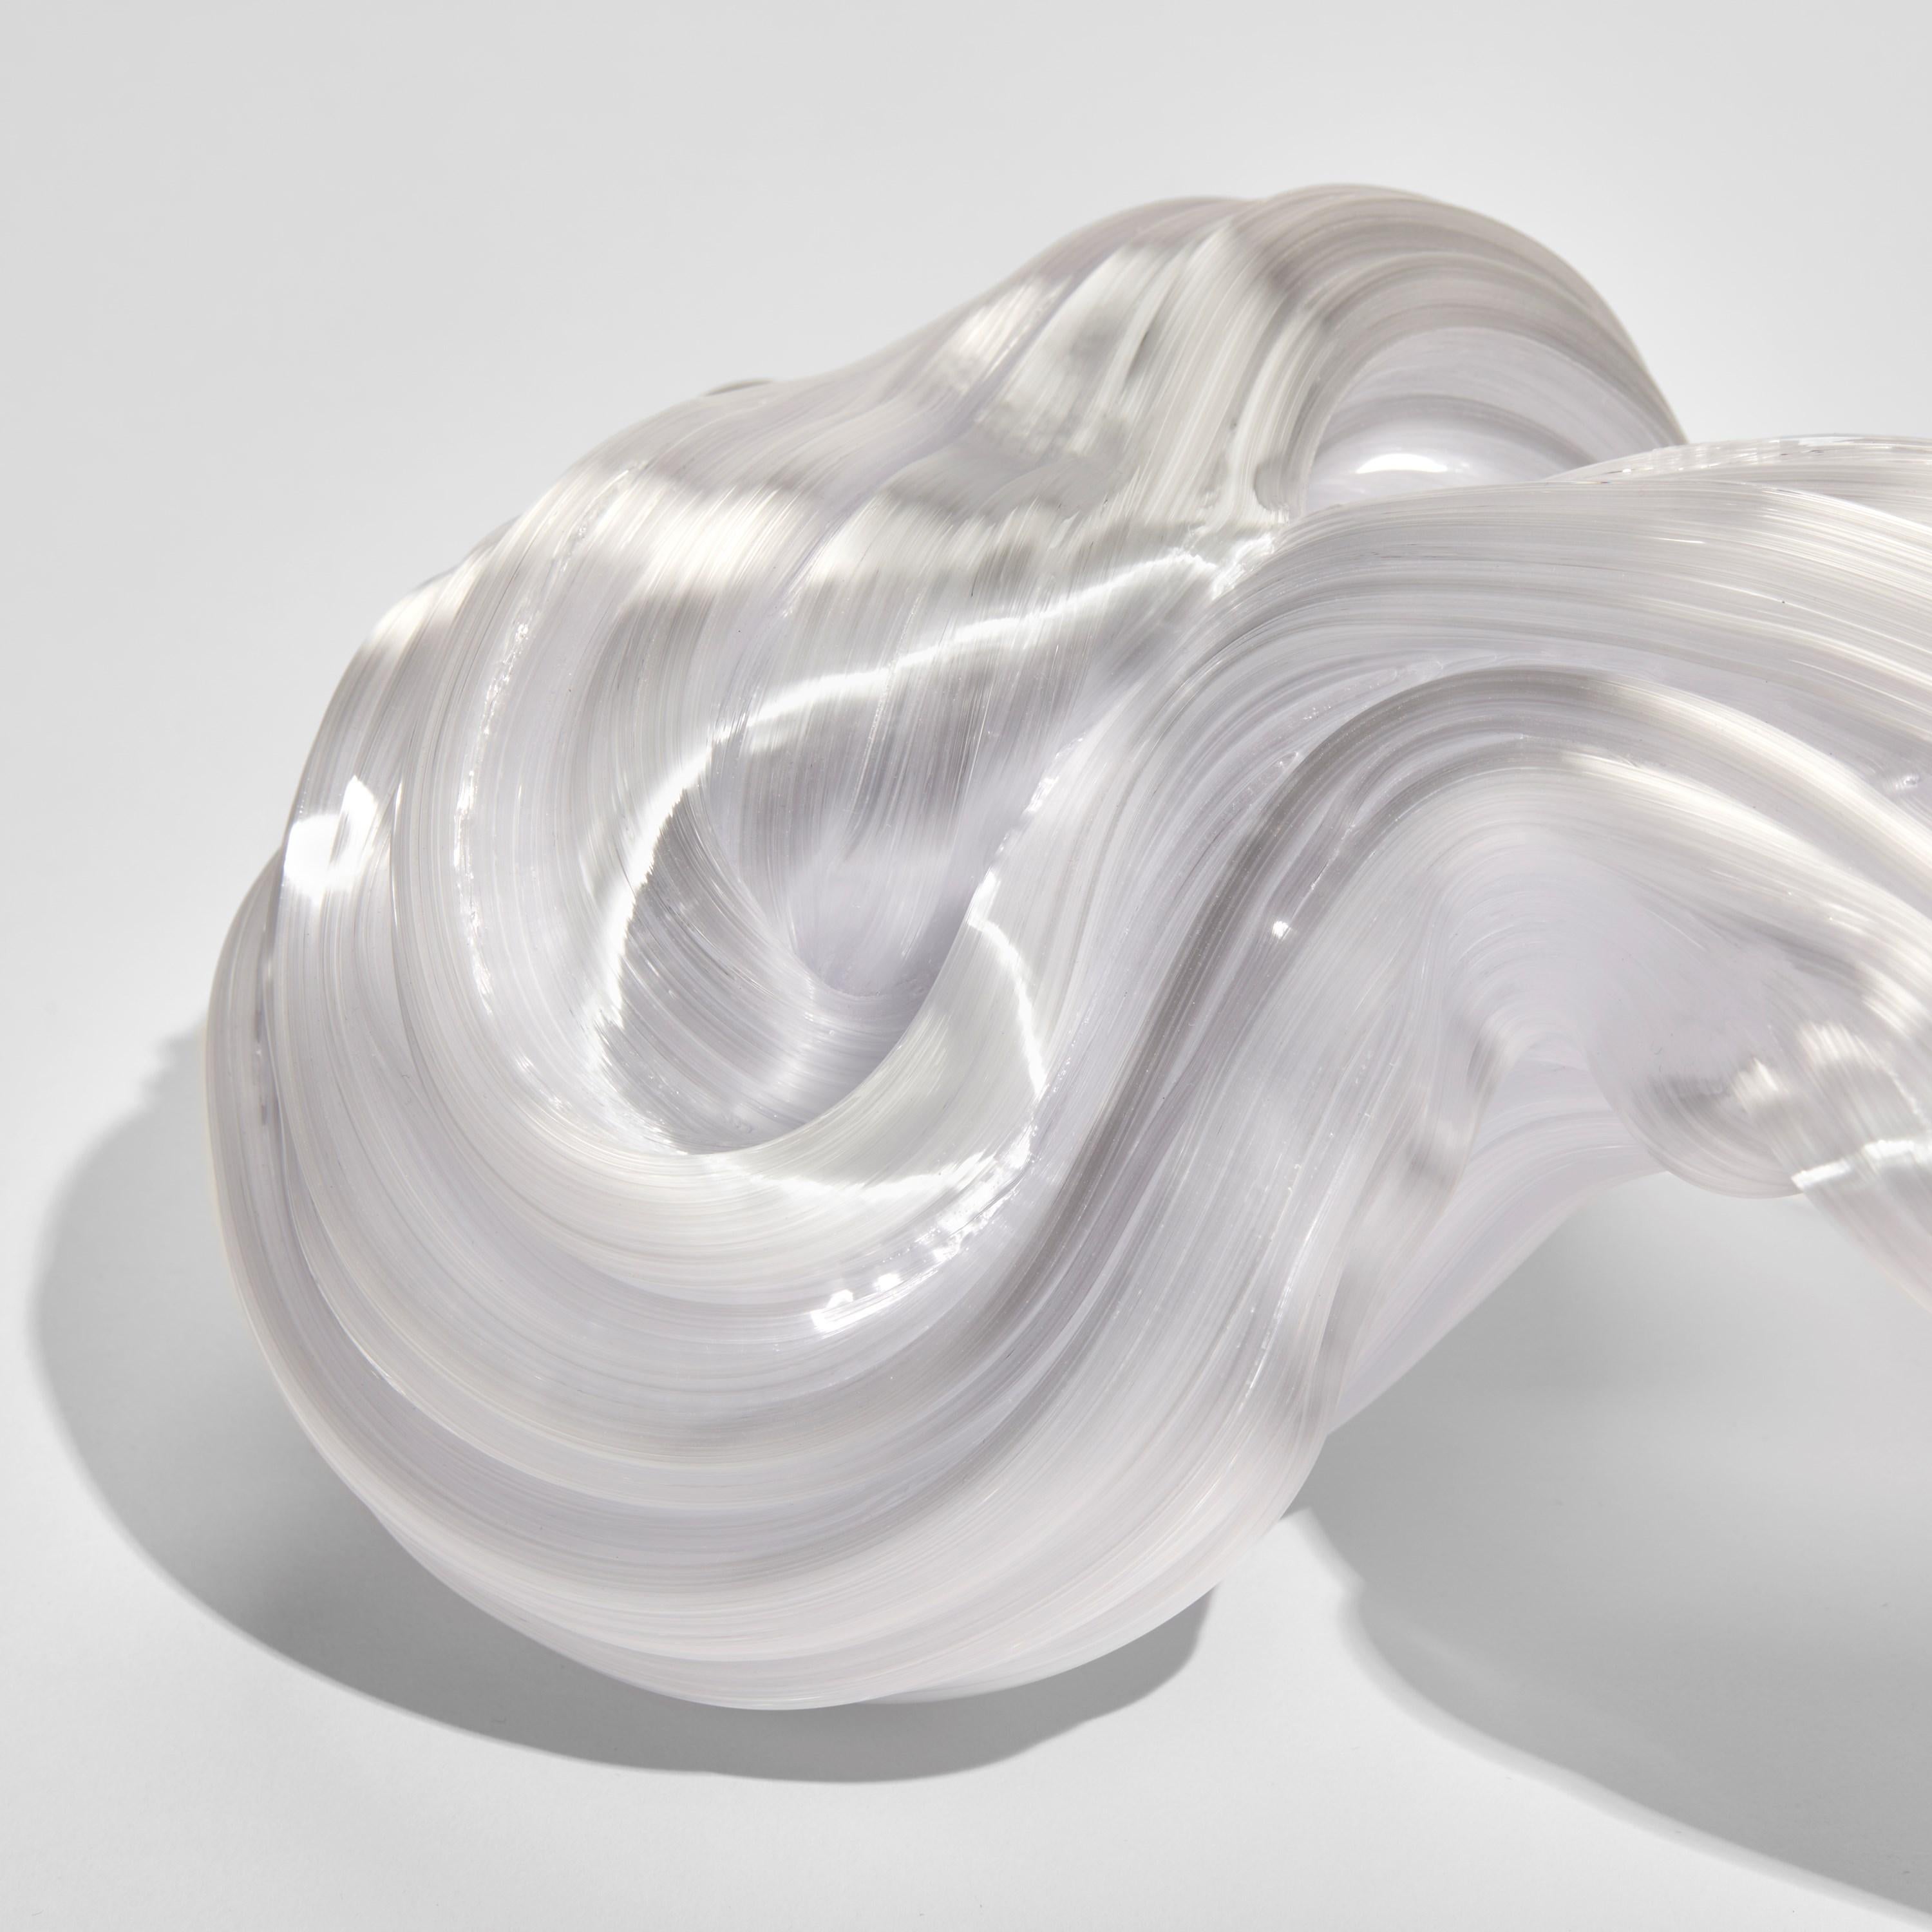 Contemporary  Around in White, a Unique Abstract Glass Sculpture by Maria Bang Espersen